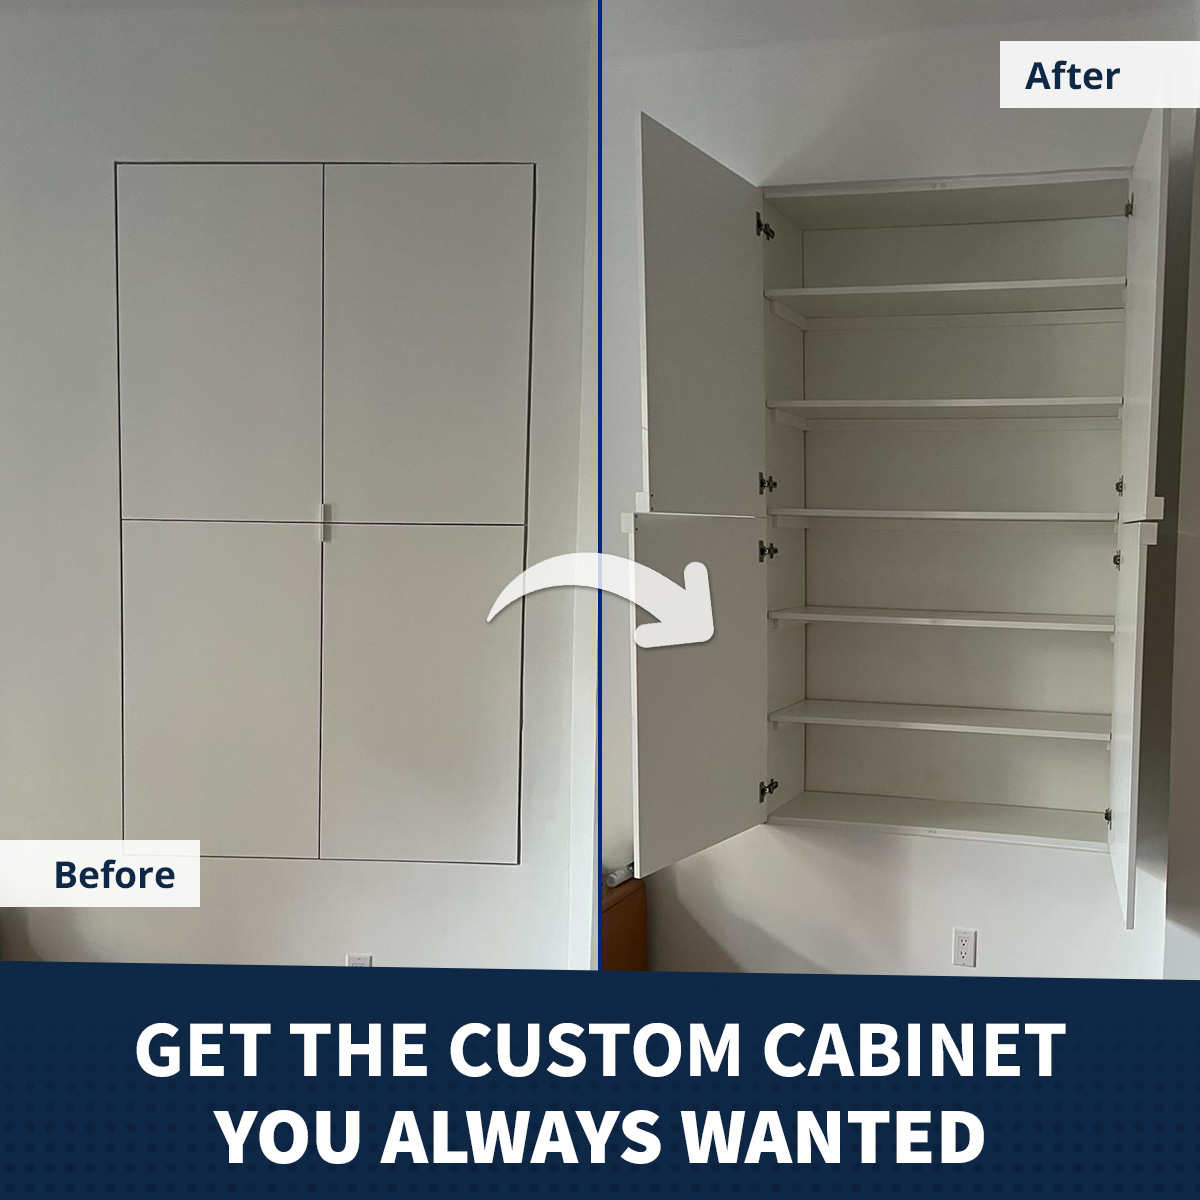 Get the custom cabinet you always wanted